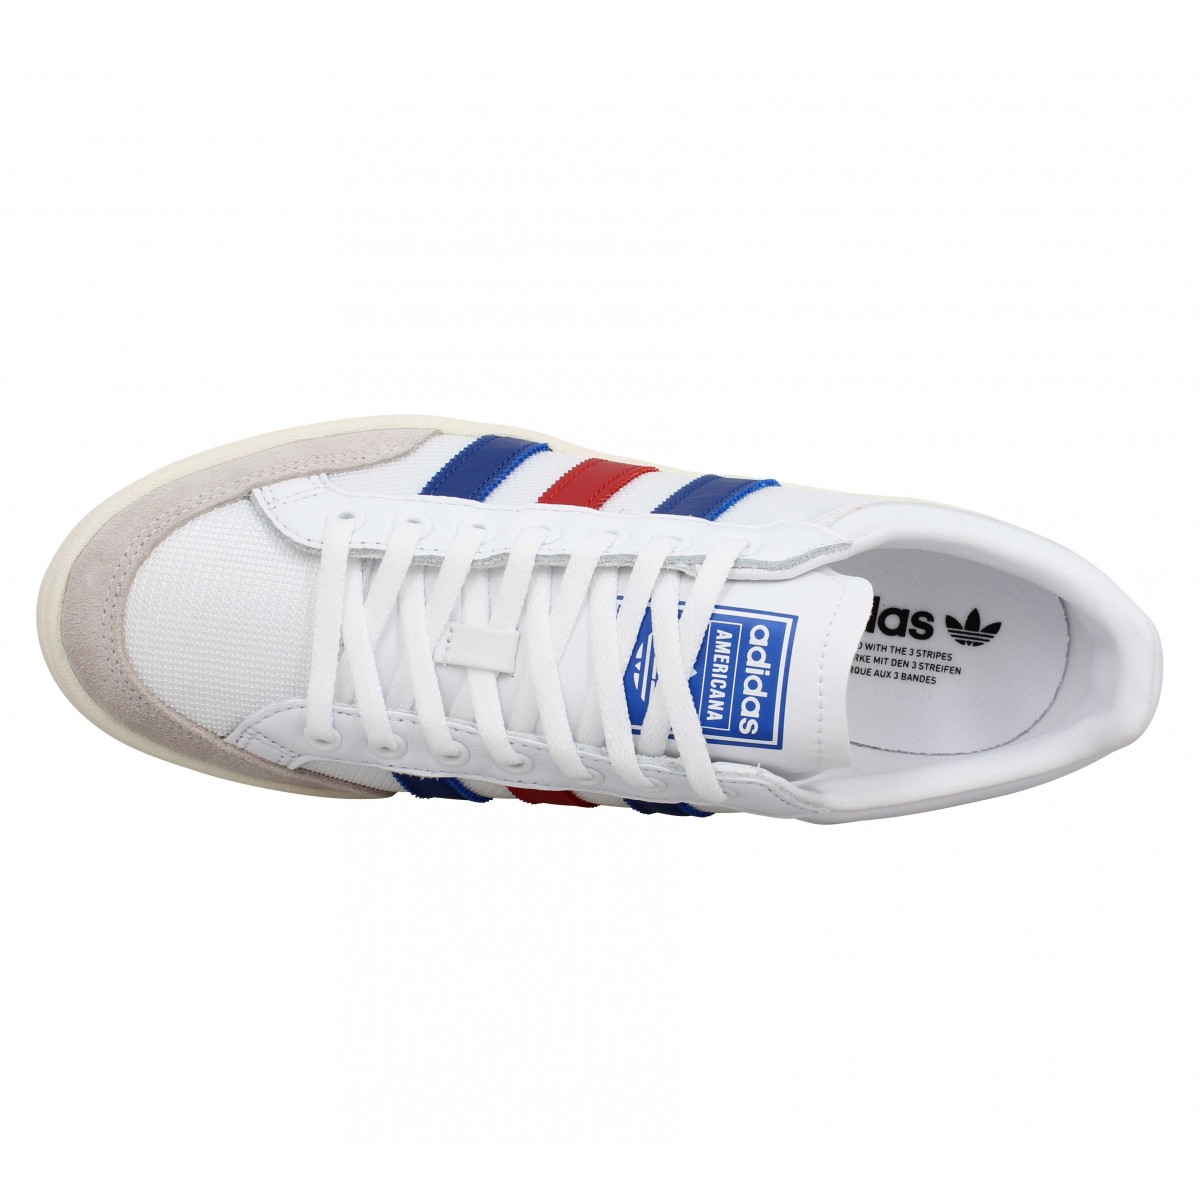 adidas americana low homme